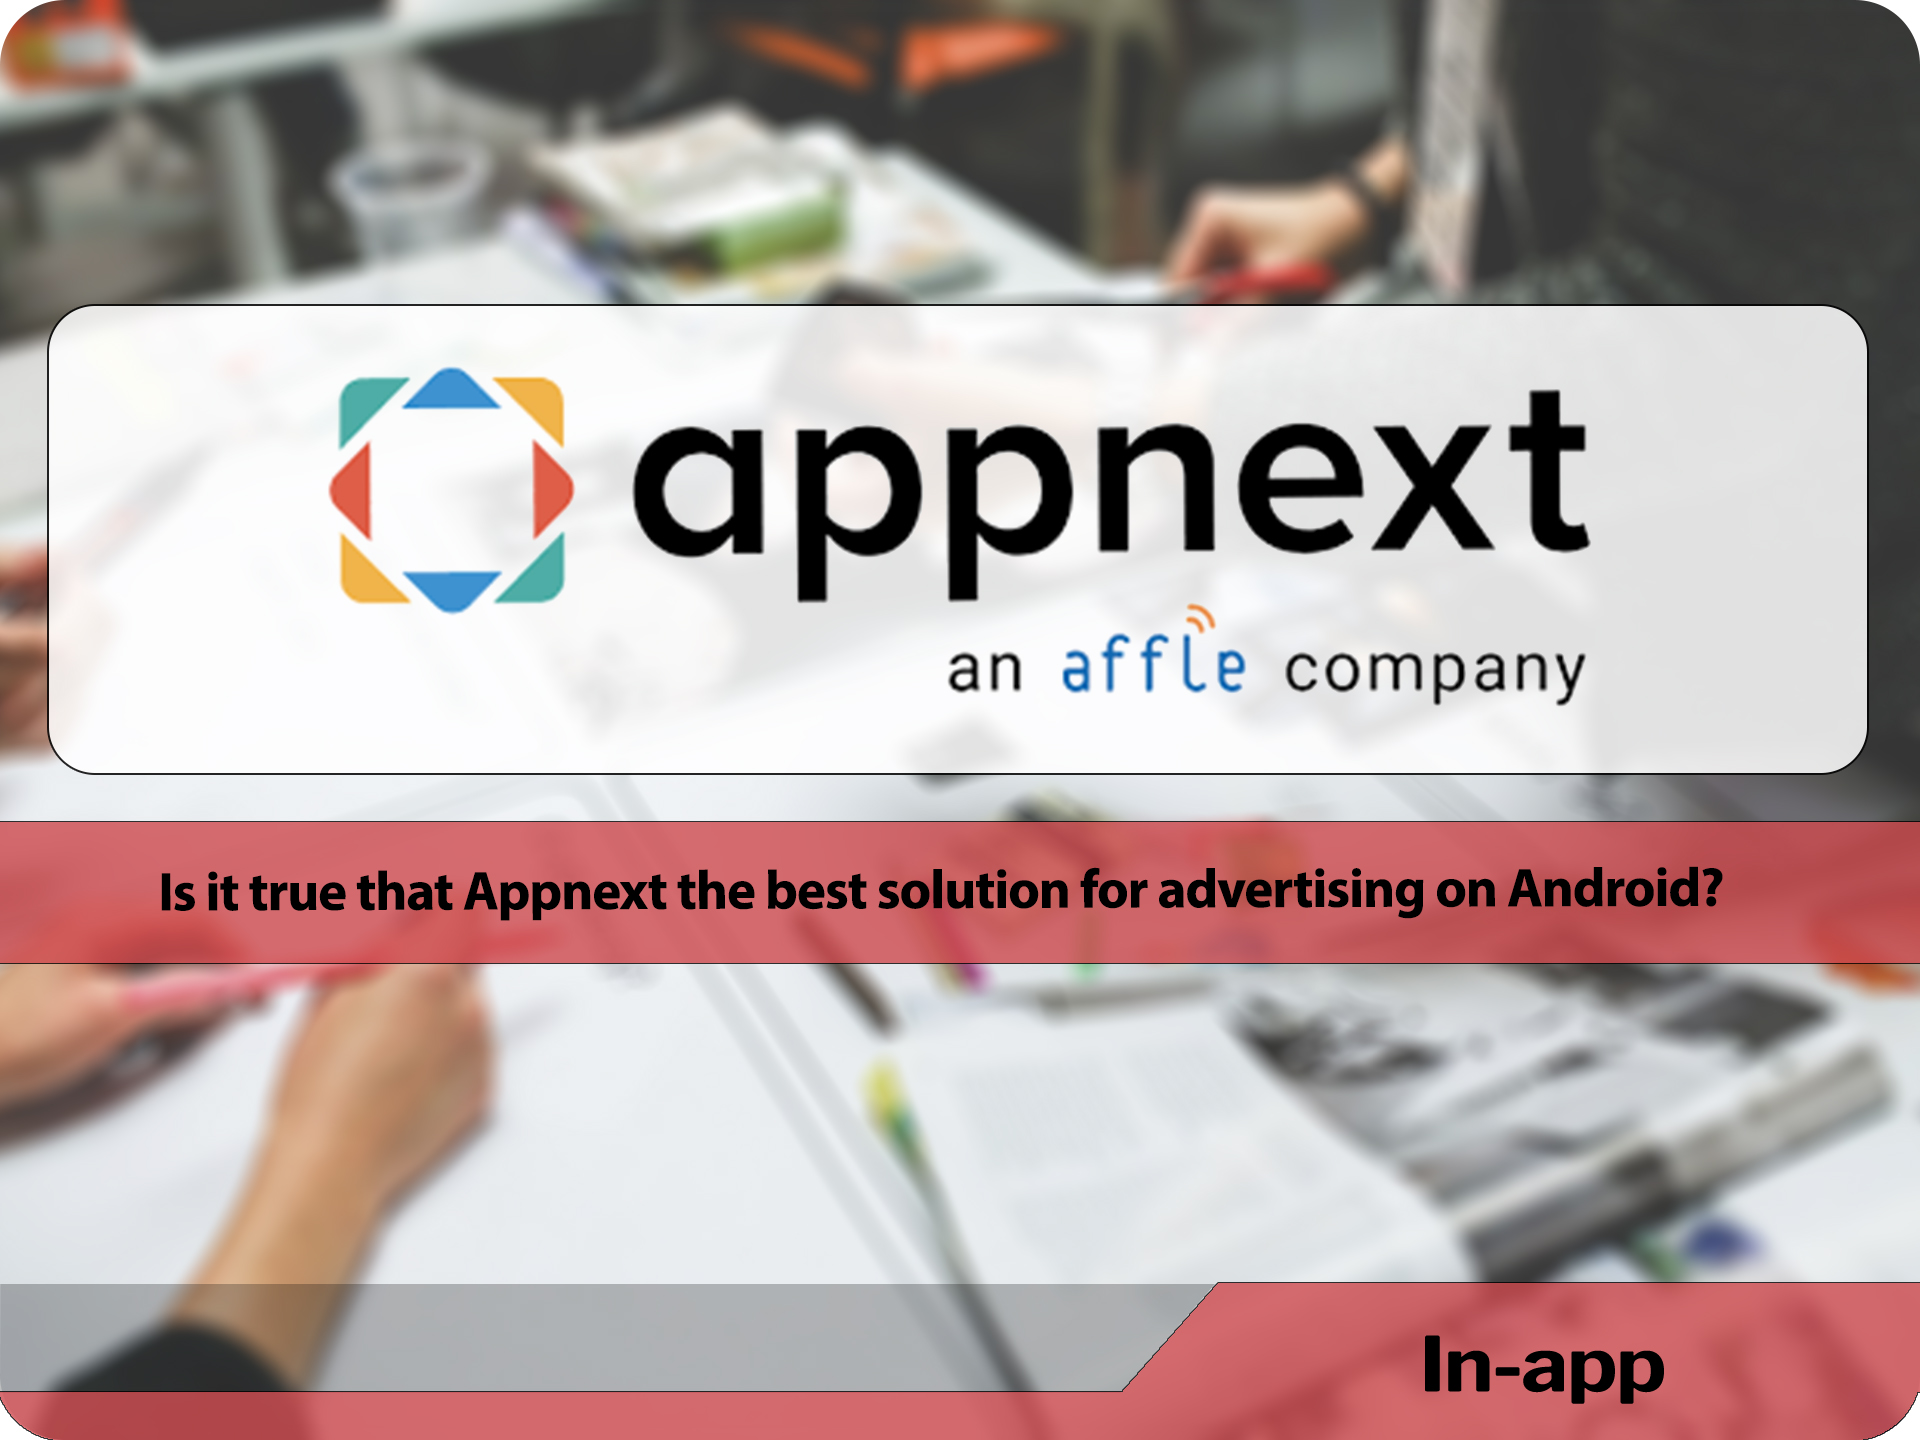 Is it true that Appnext the best solution for advertising on Android?